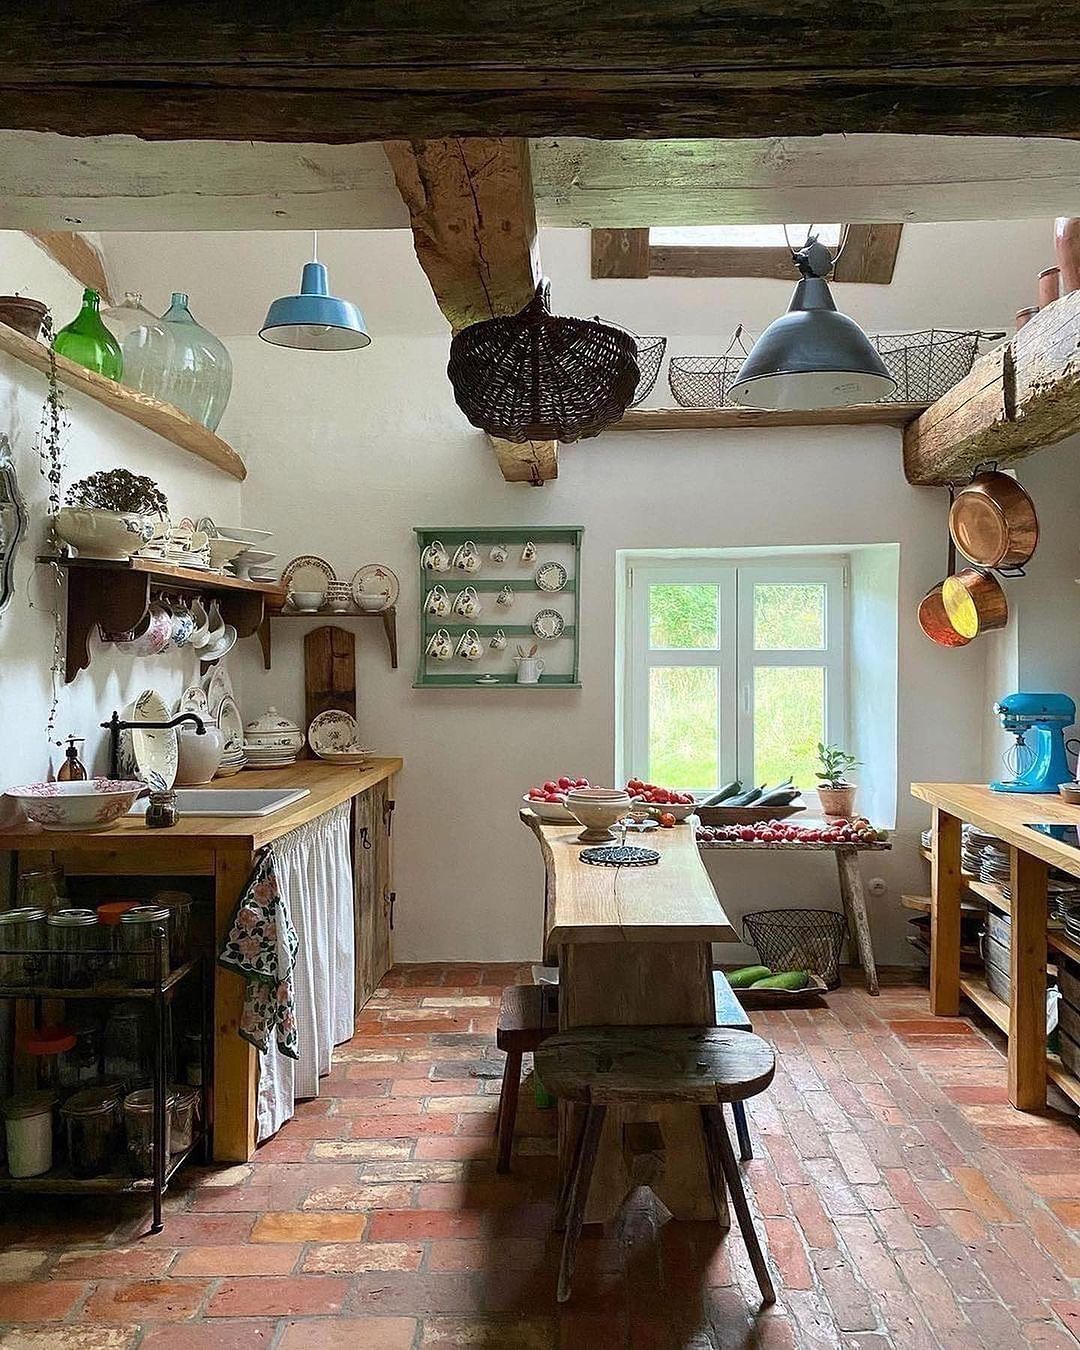 a rustic kitchen uses humble materials such as natural distressed wood, clay, and metal